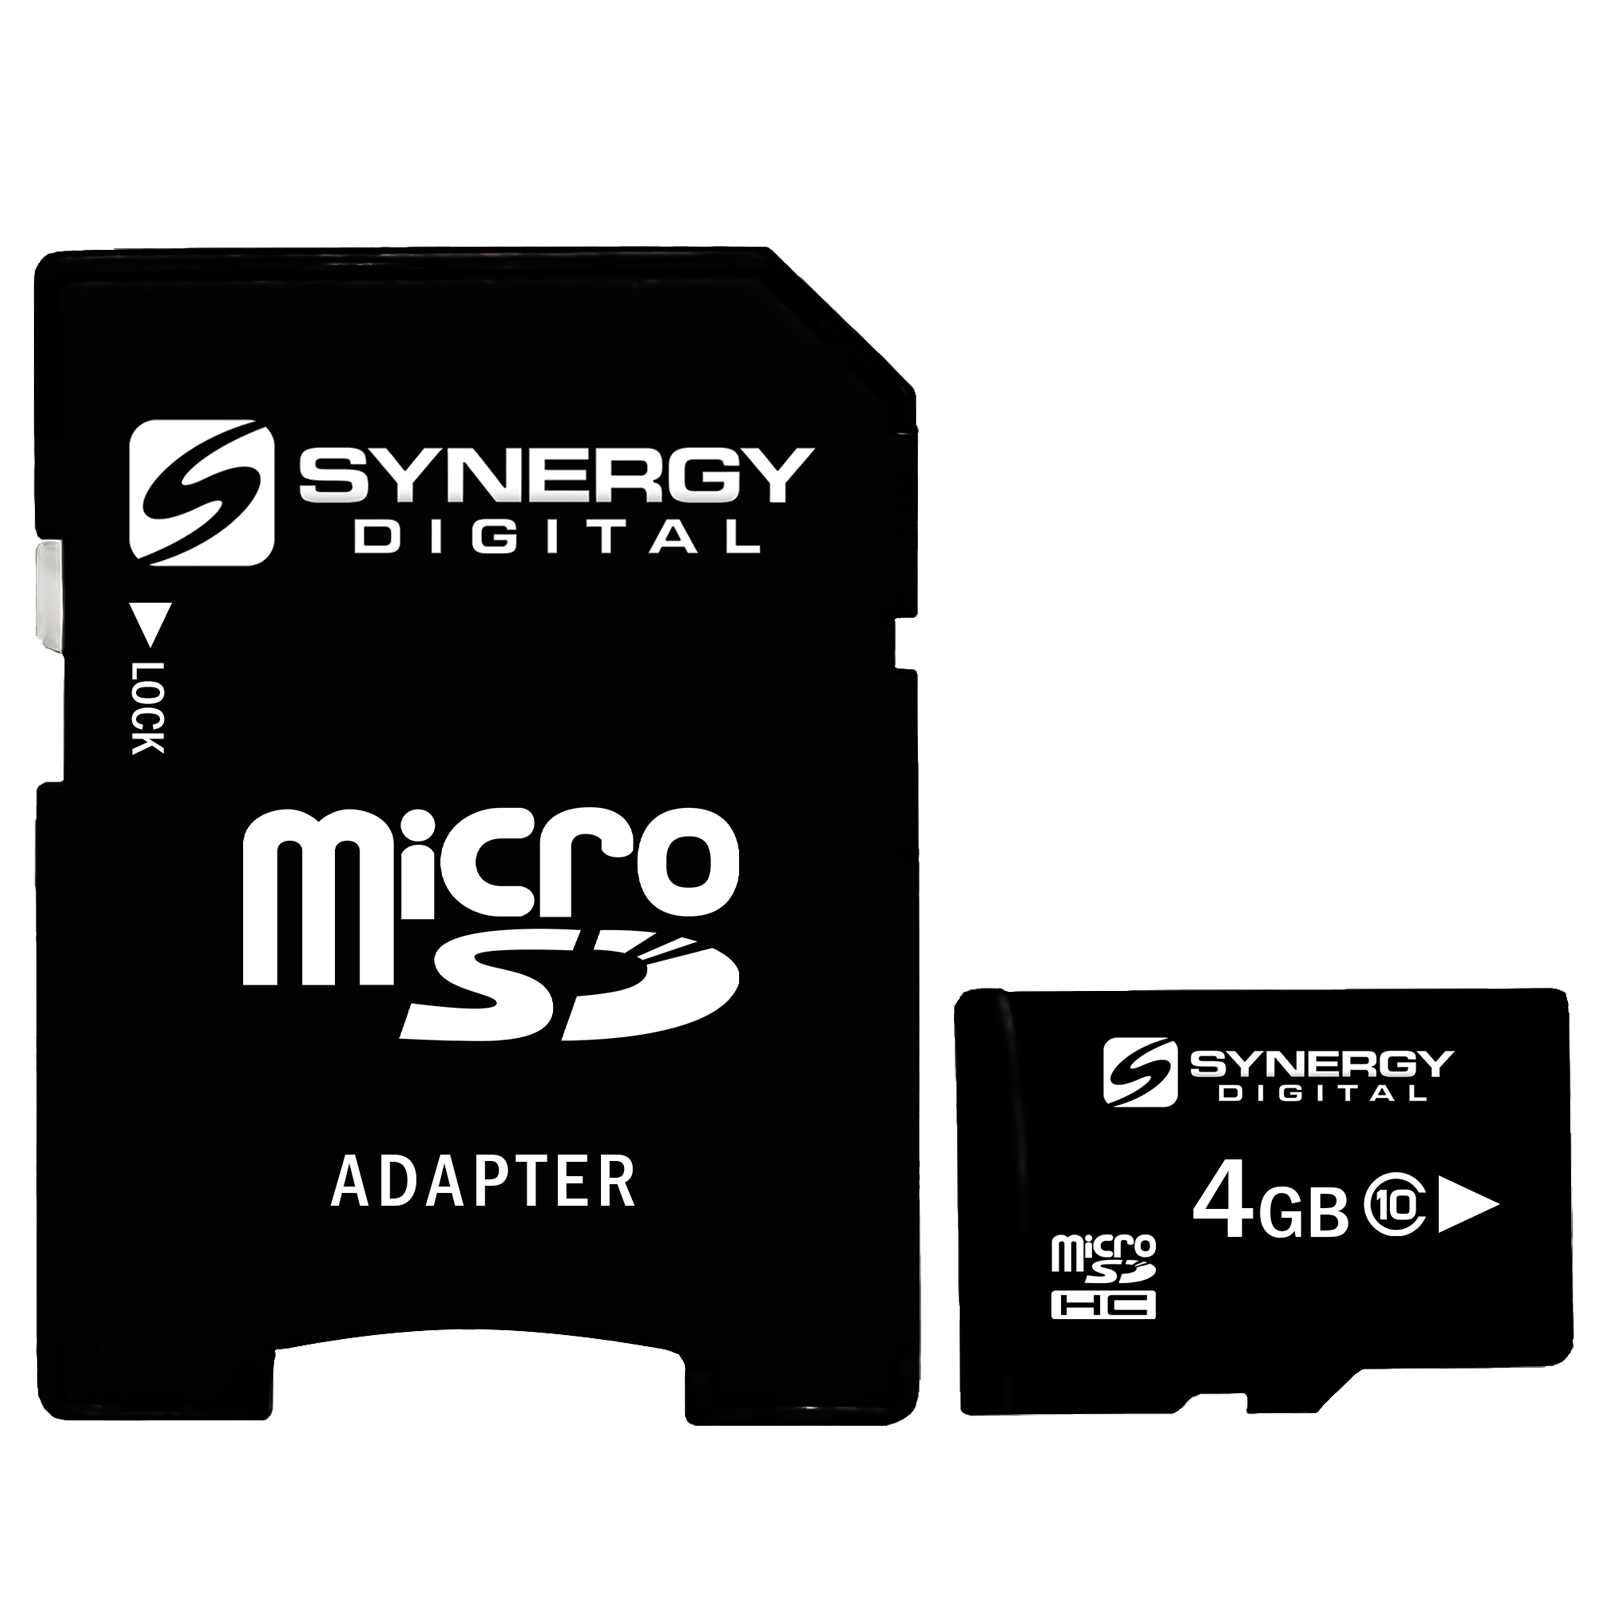 Memory Cards for KyoceraCell Phone